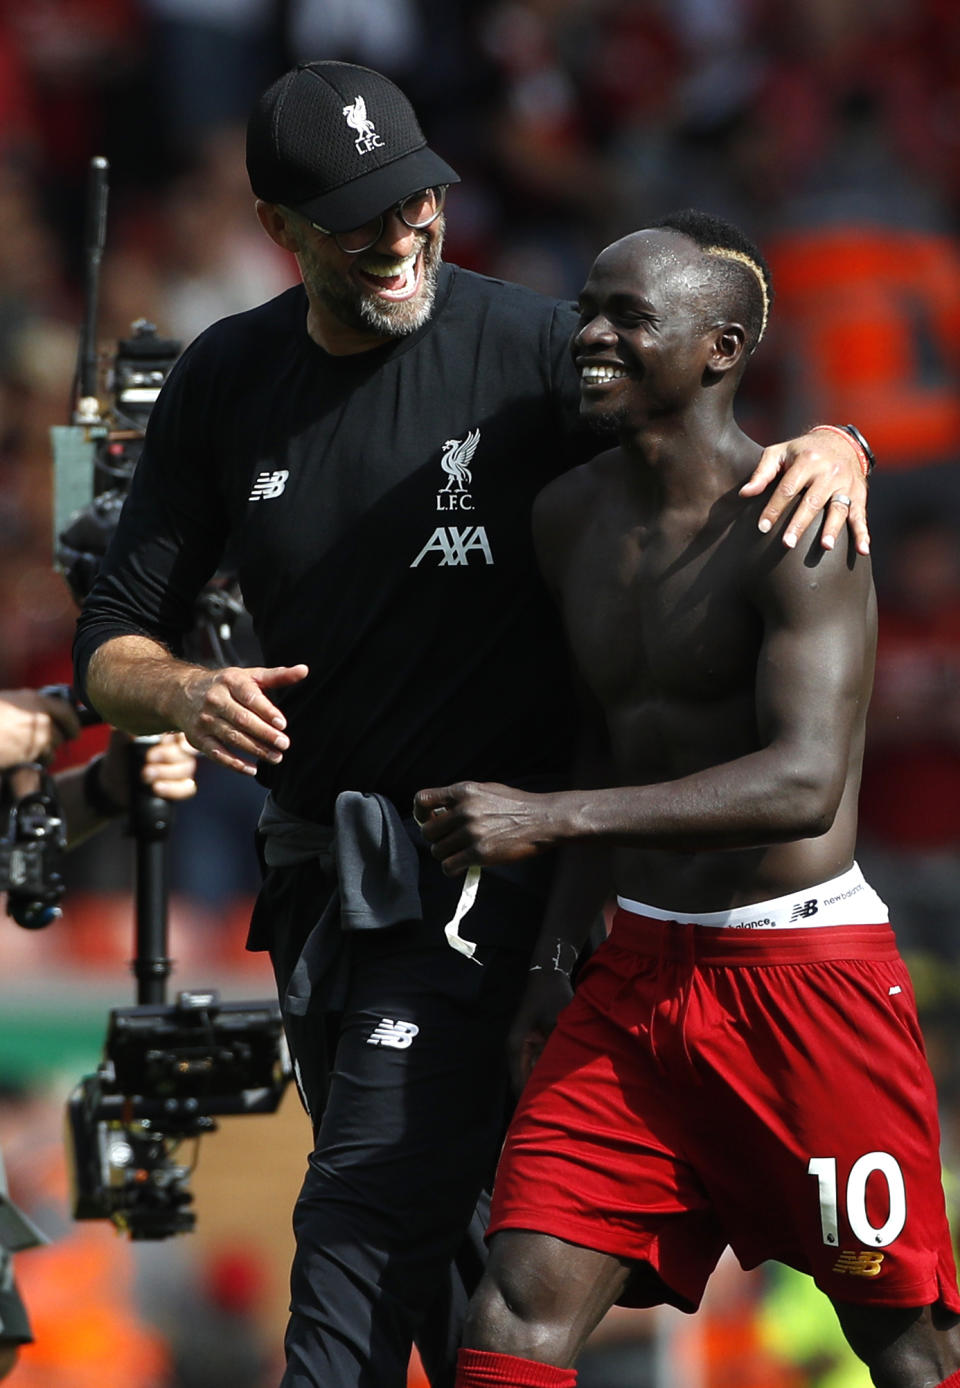 Liverpool's manager Jurgen Klopp, left, celebrates with Liverpool's Sadio Mane after the English Premier League soccer match between Liverpool and Newcastle at Anfield stadium in Liverpool, England, Saturday, Sept. 14, 2019. (AP Photo/Rui Vieira)